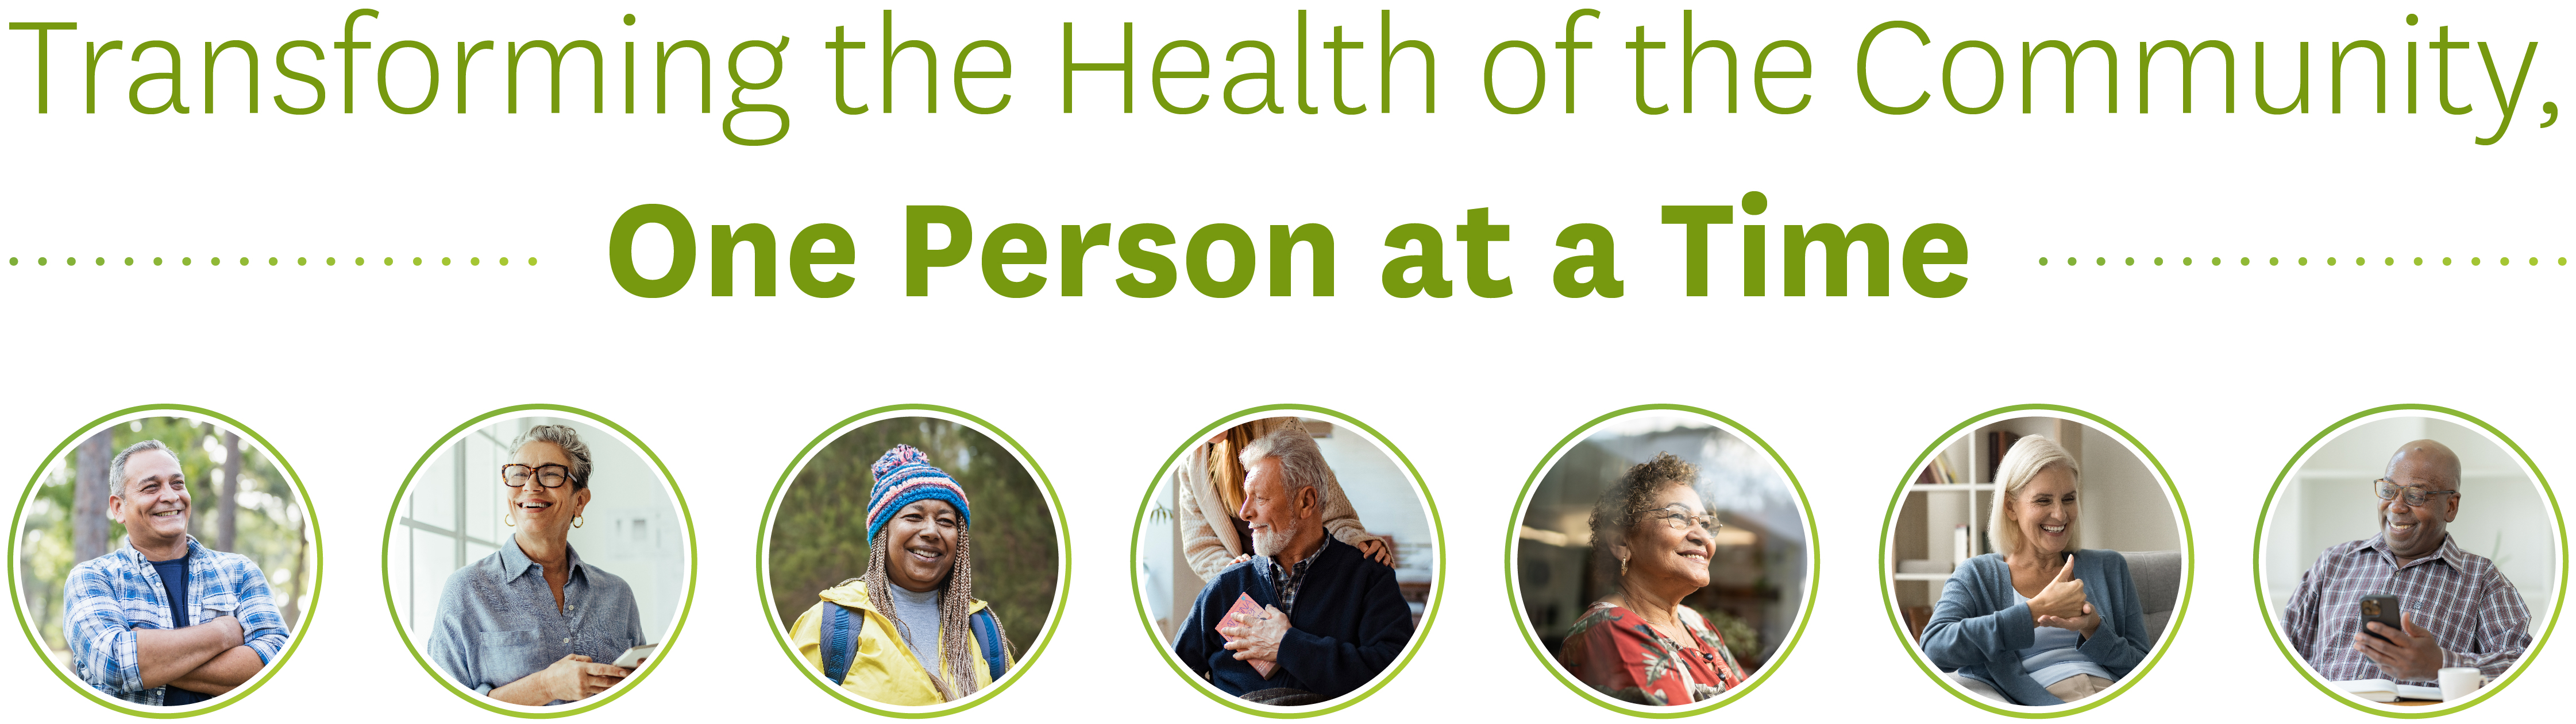 Transforming the Health of the Community, One Person at a Time